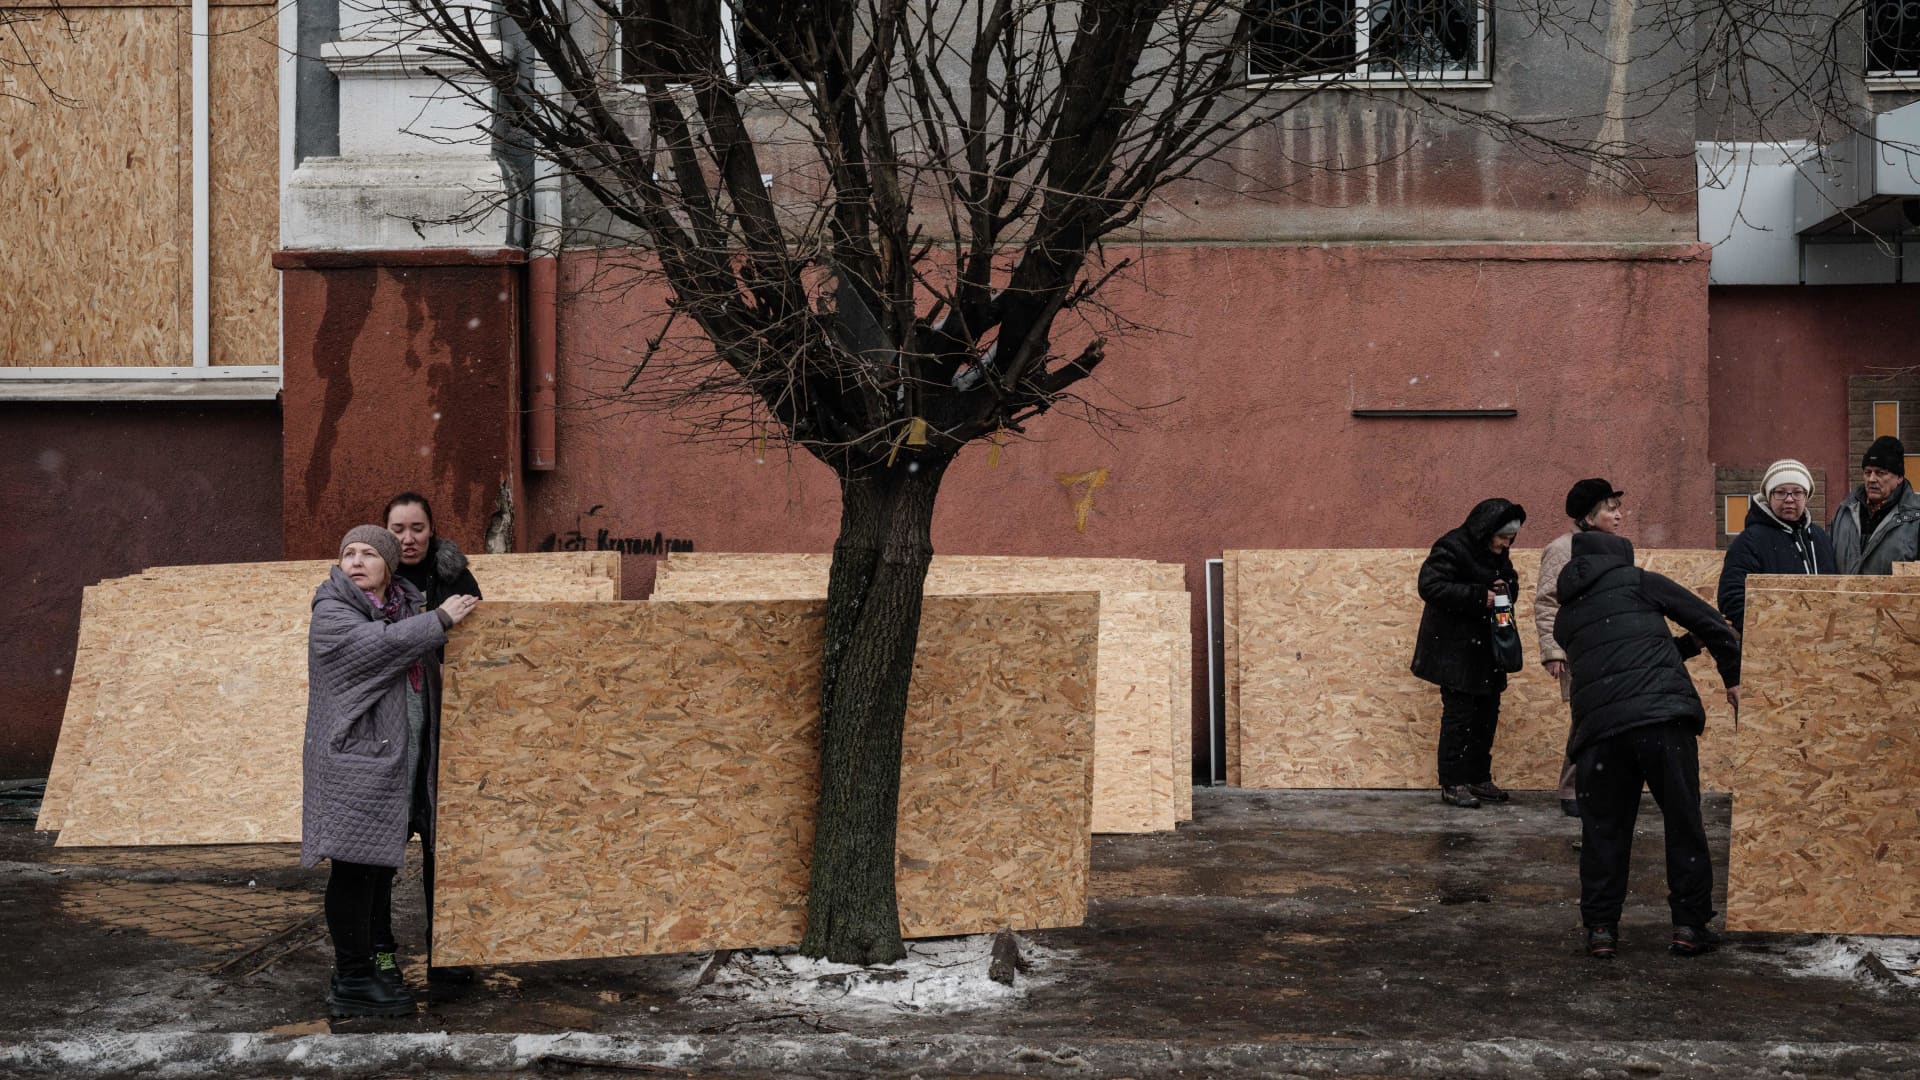 People receive plywood to close broken windows after a rocket strike hit a residential building in Kramatorsk on February 2, 2023, amid the Russian invasion of Ukraine. - At least three people were killed on February 2, 2023, and 20 wounded when a Russian rocket struck a residential building in the centre of Kramatorsk, located in Ukraine's eastern industrial region of Donetsk.